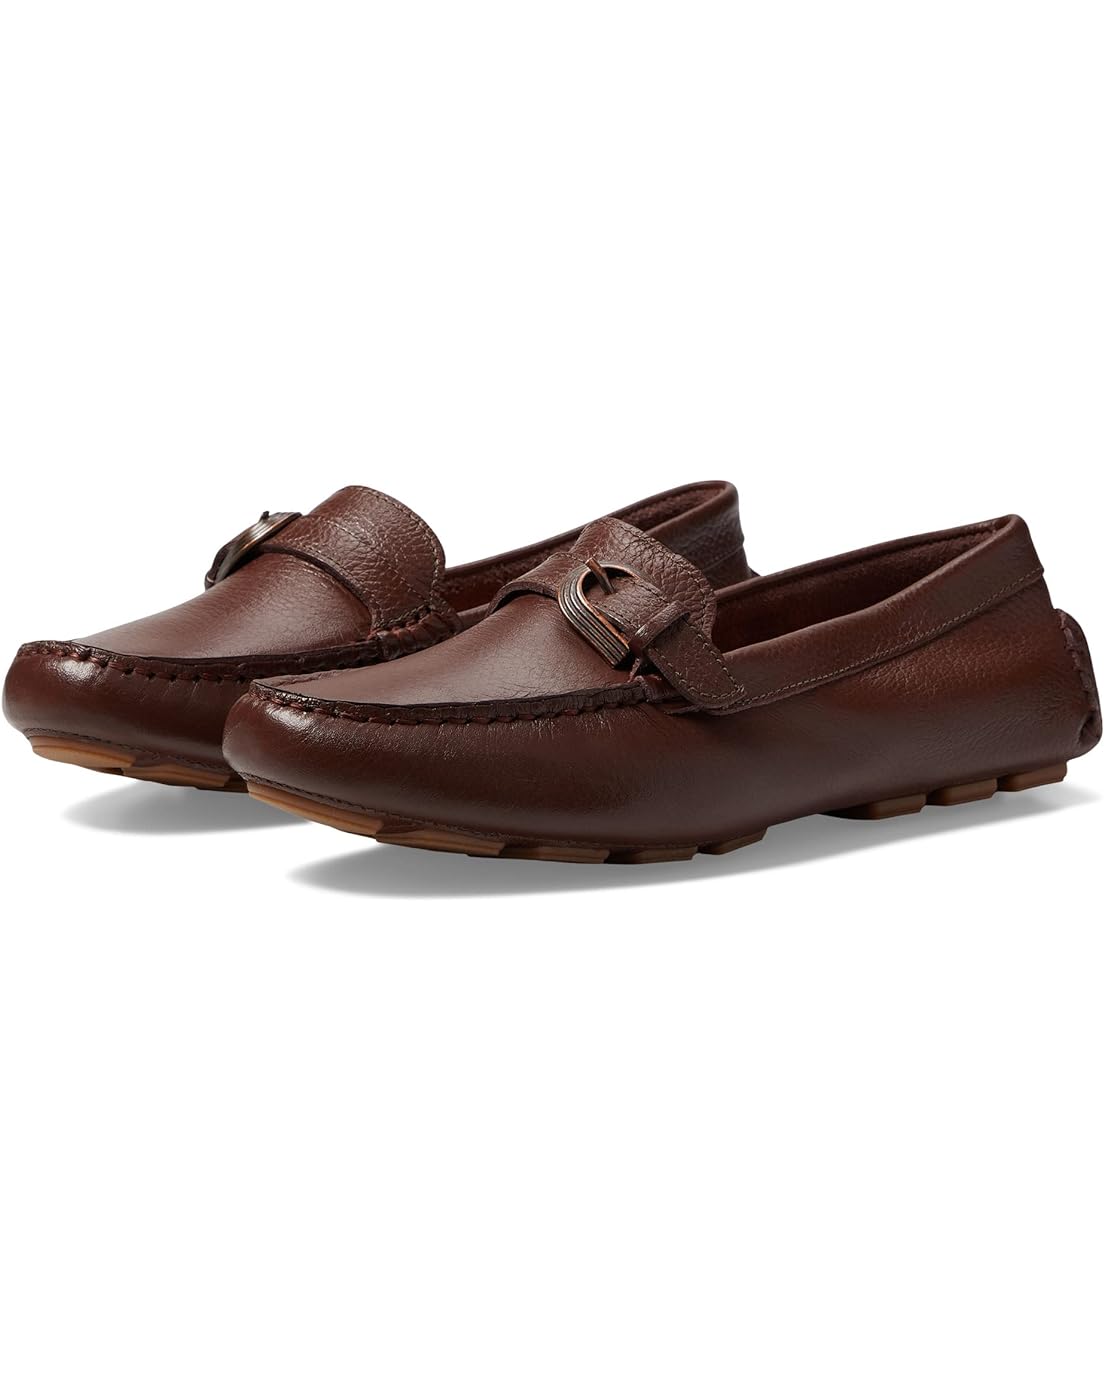 Rockport Bayview Rib Loafer